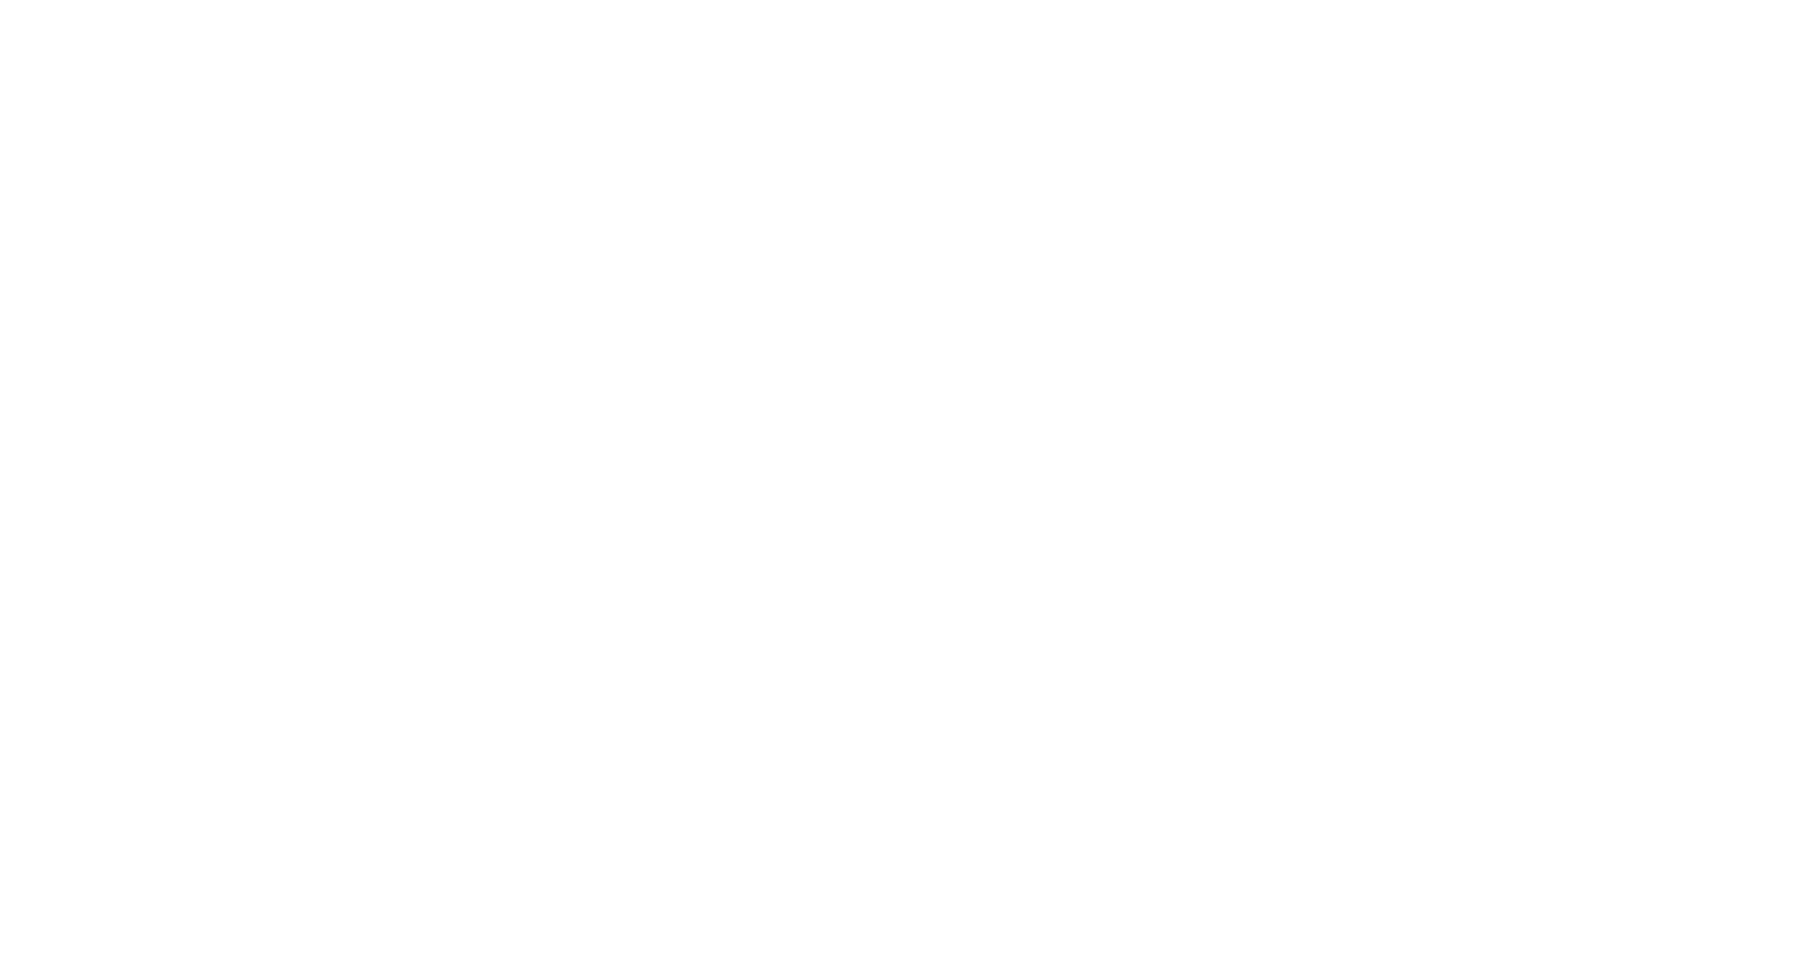 MAN ON THE BOON